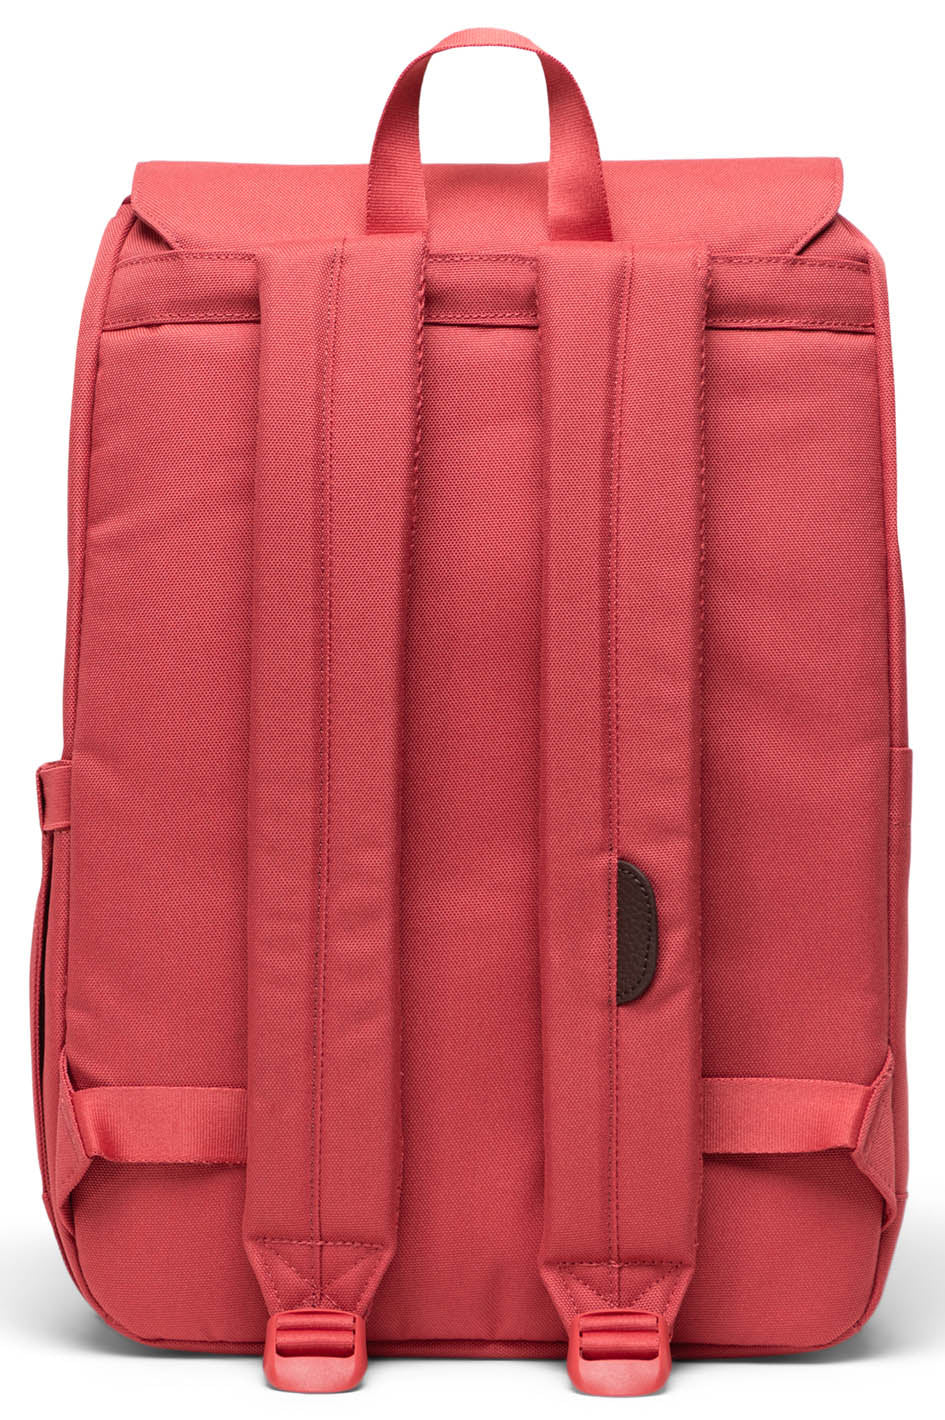 Herschel Retreat Small Backpack - Mineral Rose